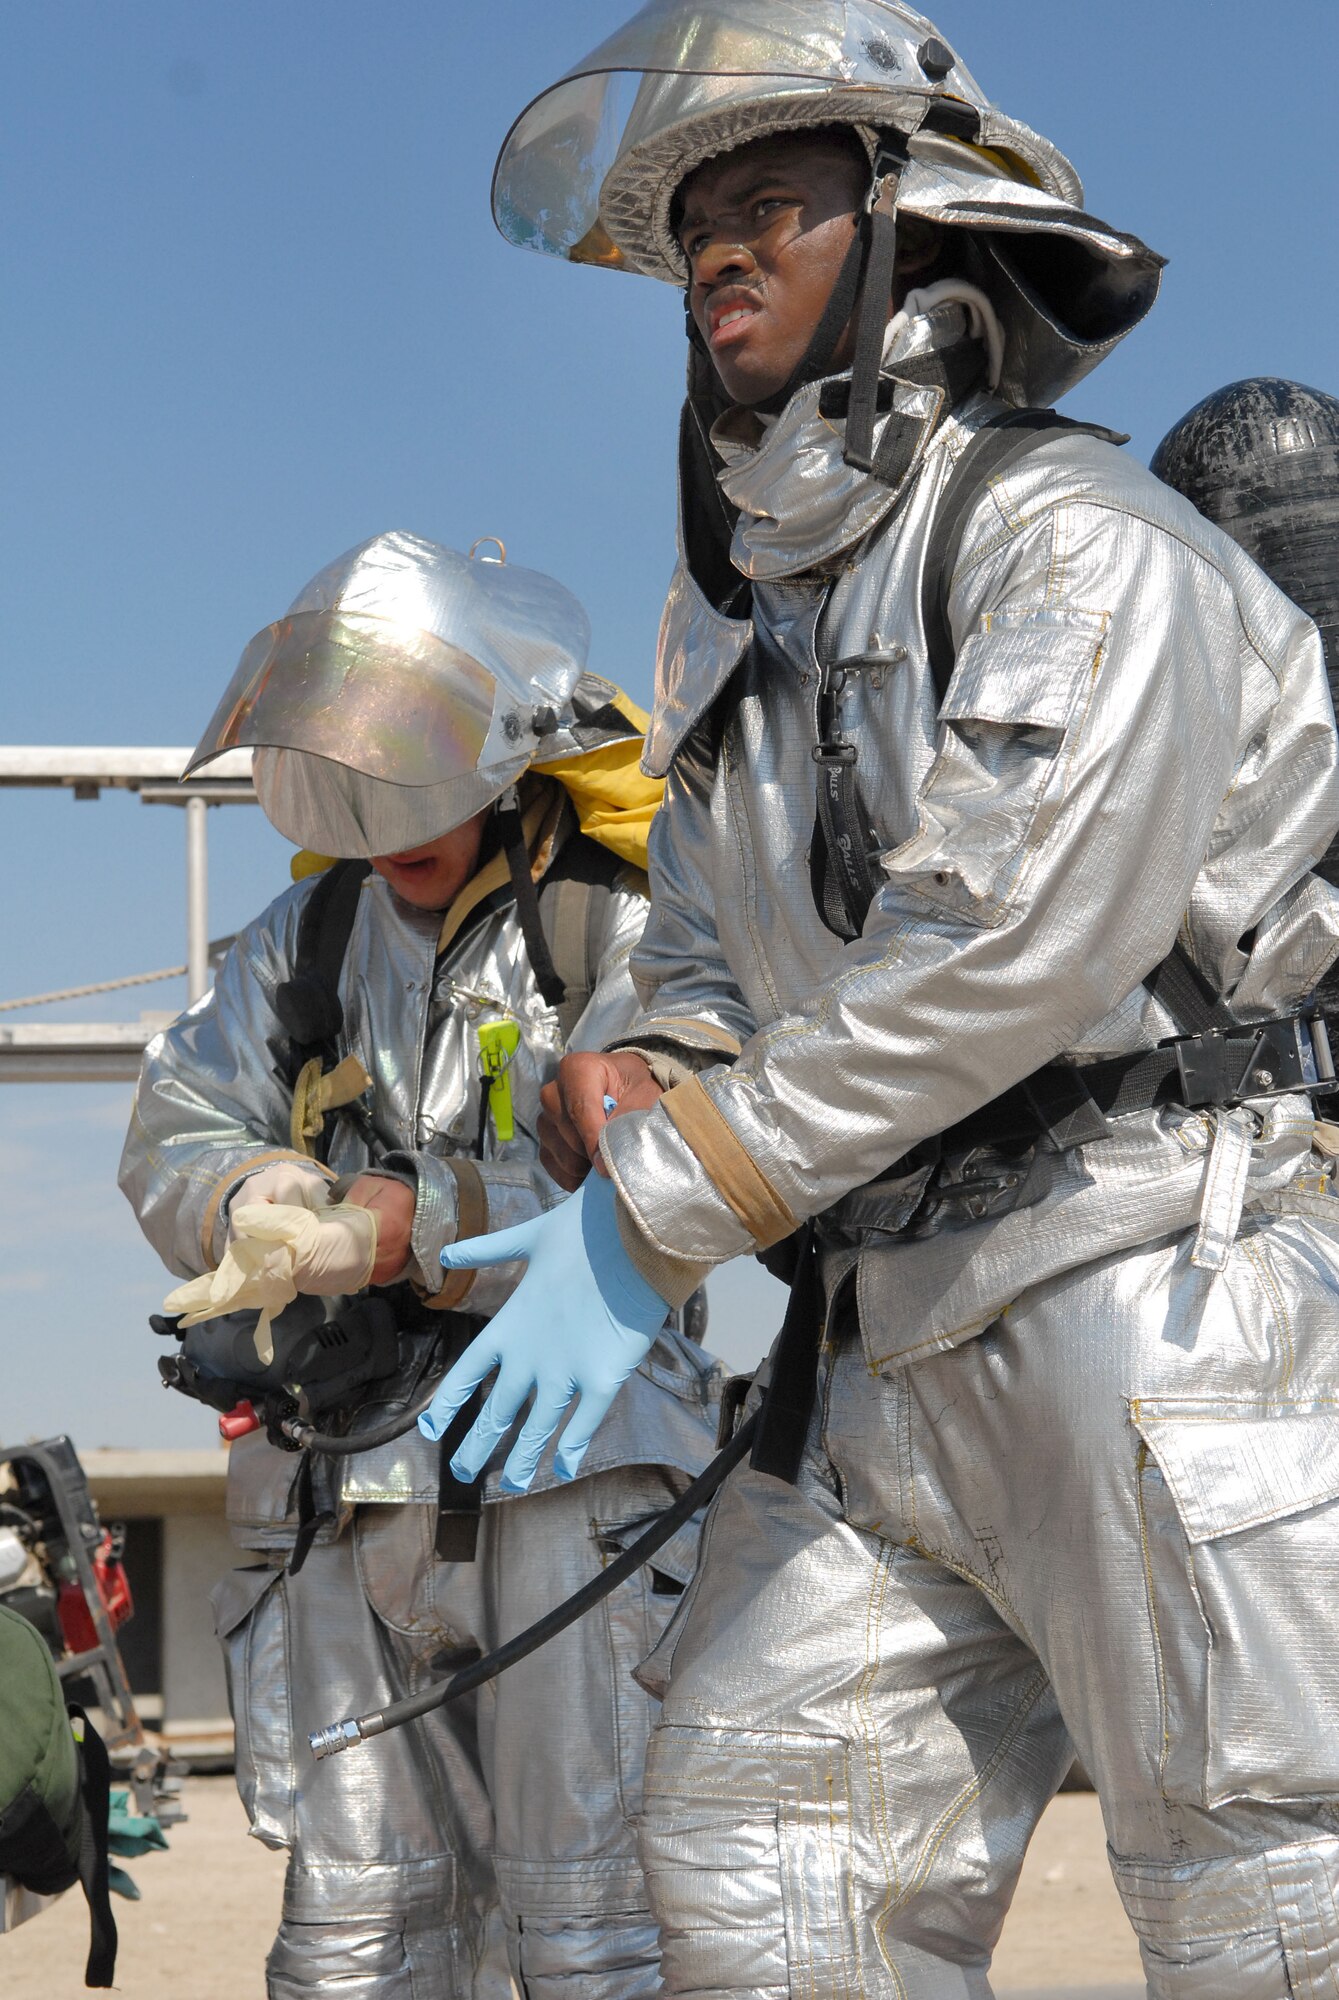 SOUTHWEST ASIA -- Airmen 1st Class Courtland Dickerson and Ryan Britz, both fire protection journeymen with the 380th Expeditionary Civil Engineer Fire and Emergency Services Flight, don protective gloves as they head toward a simulated mass-casualty scene after a simulated terrorist attack here Dec. 12. The deployed Airmen are all taking part in an exercise which tests and evaluates the 380th Air Expeditionary Wing's response to real-world scenarios. (US Air Force photo by Tech. Sgt. Denise Johnson) (released)